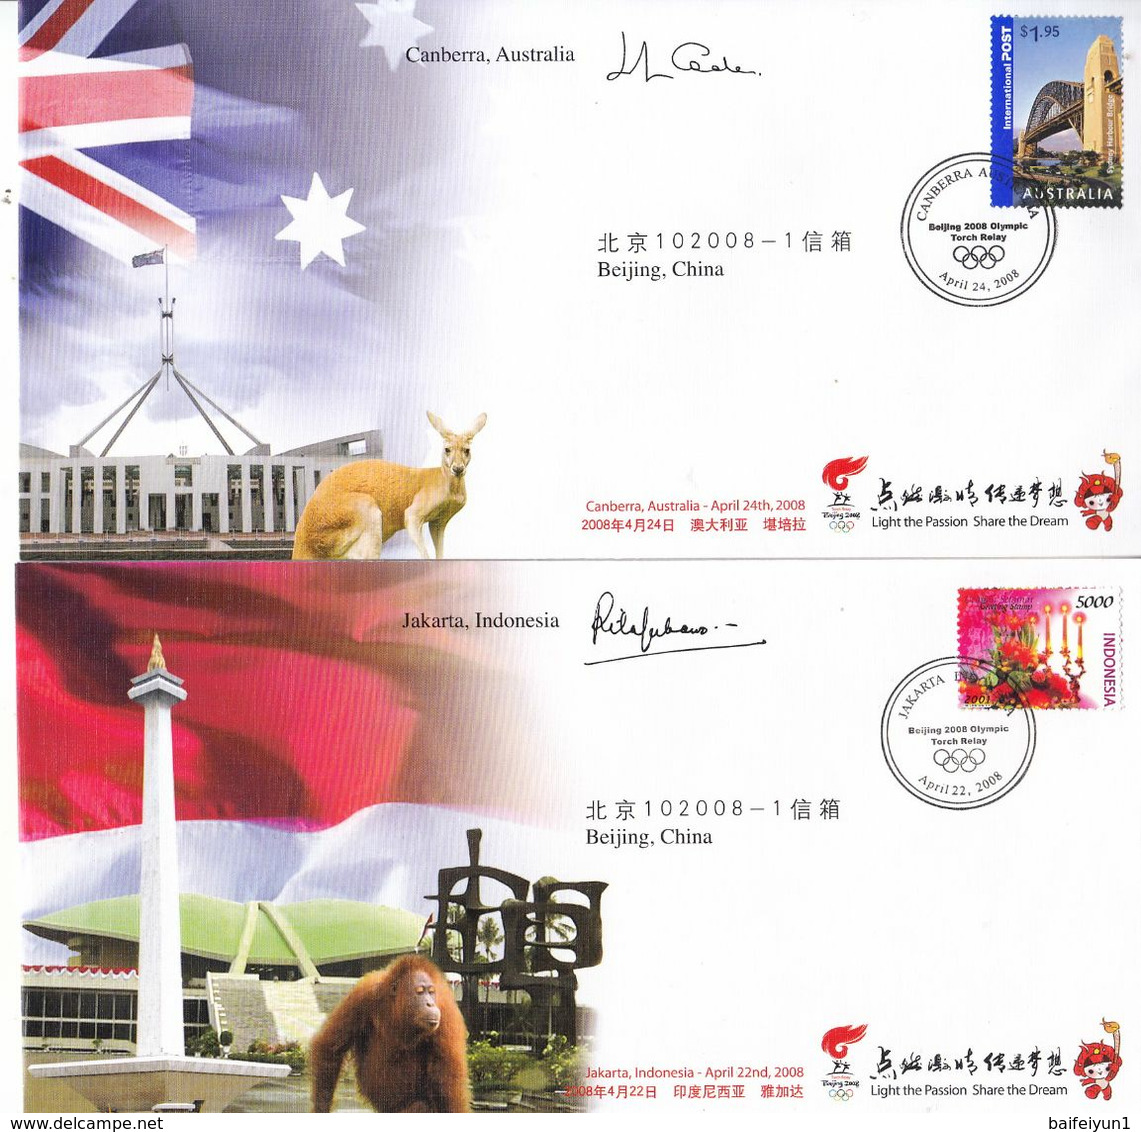 China 2008 Torch Relay of the Beijing 2008 Olympic Games(International)-Commemorative covers(21V)